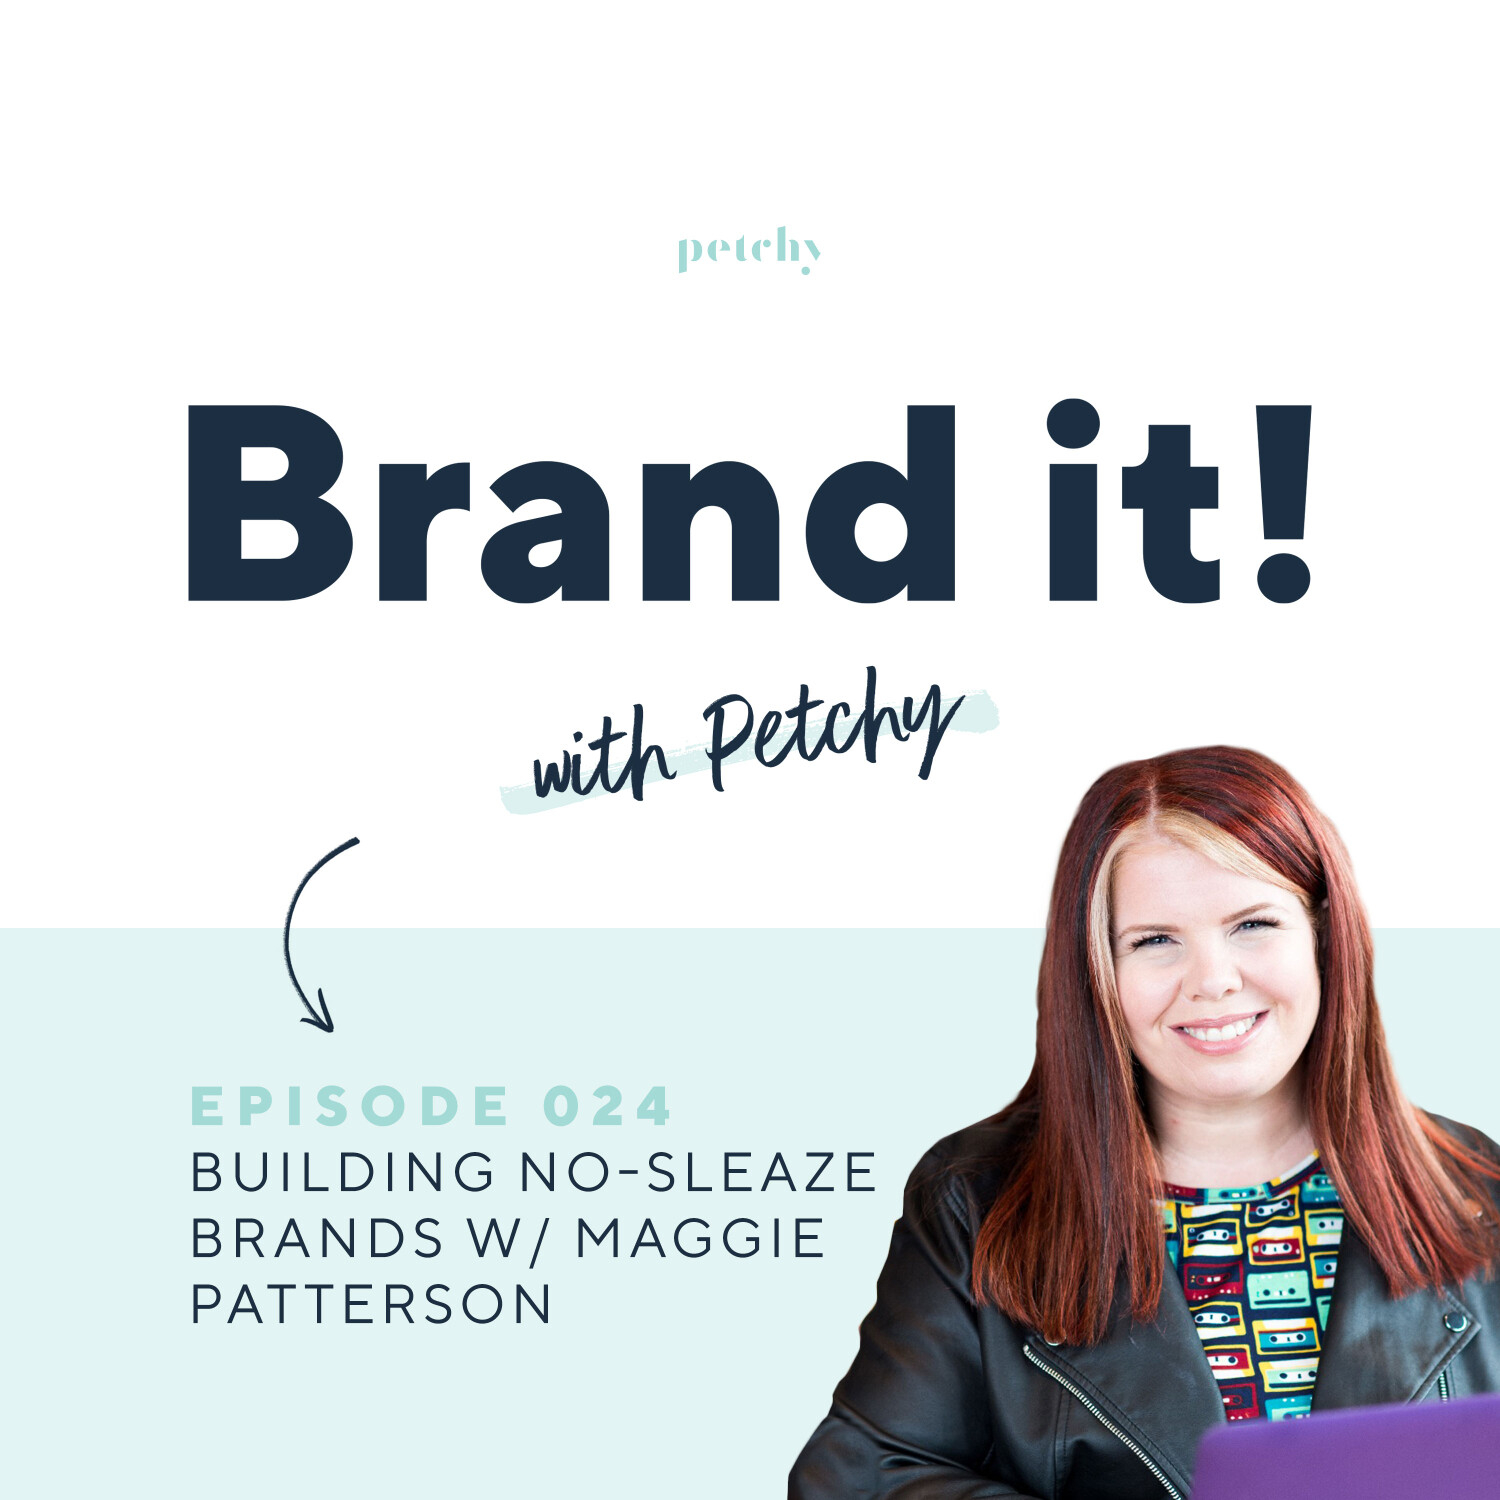 How to build an outstanding brand without being sketchy or sleazy w/ Maggie Patterson